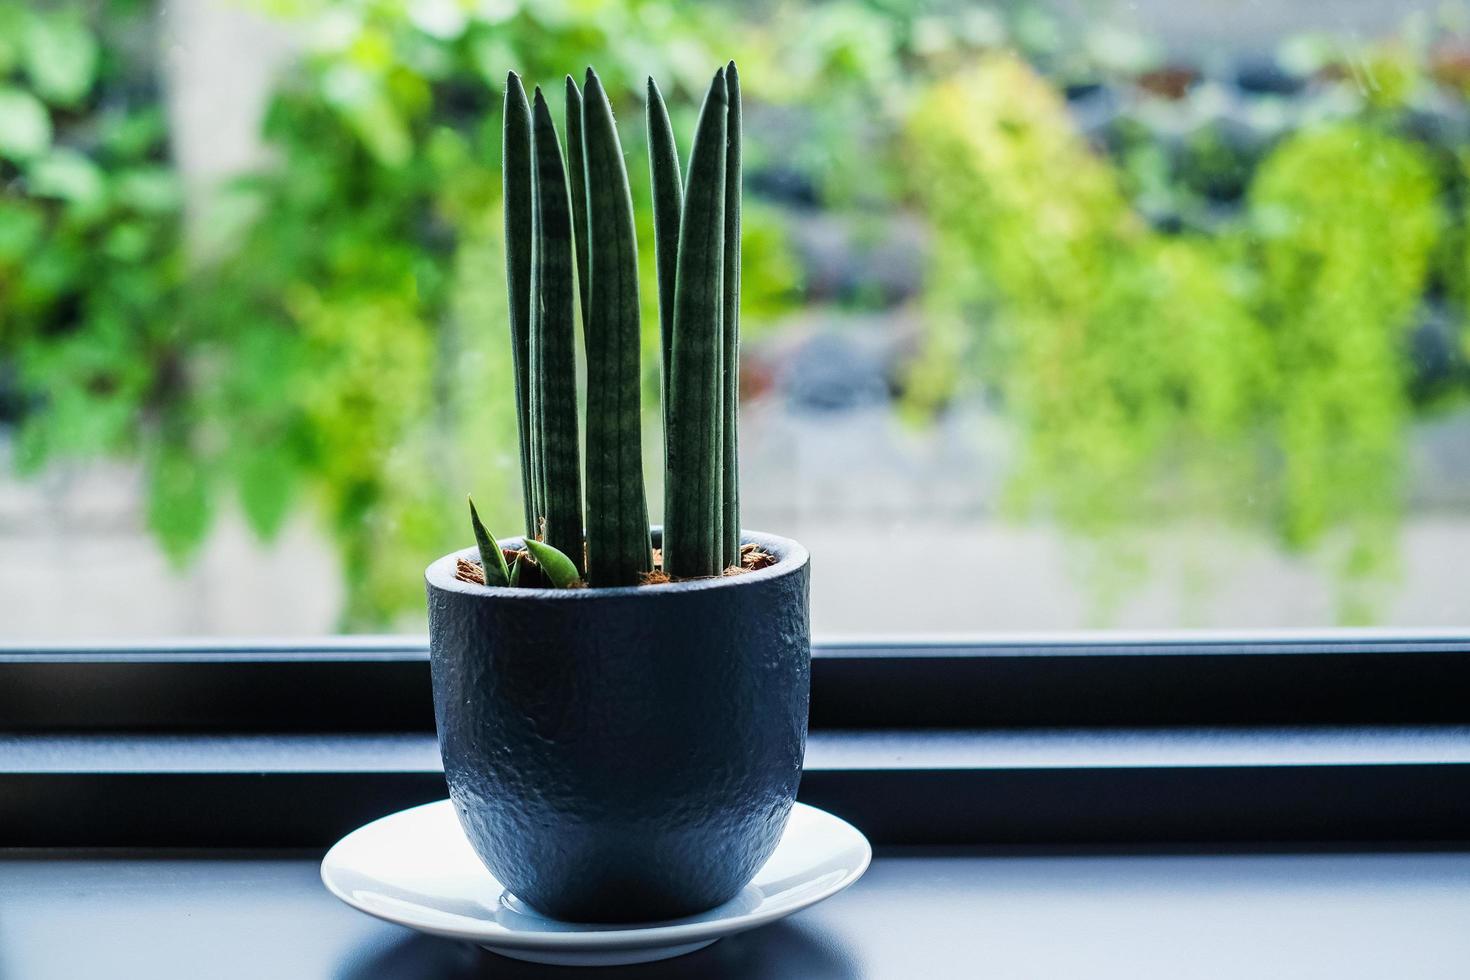 The Sansevieria stuckyi in black pot. Indoor and air purify plant near the window glass in the cafe. Minimalist style decoration in coffee shop. photo